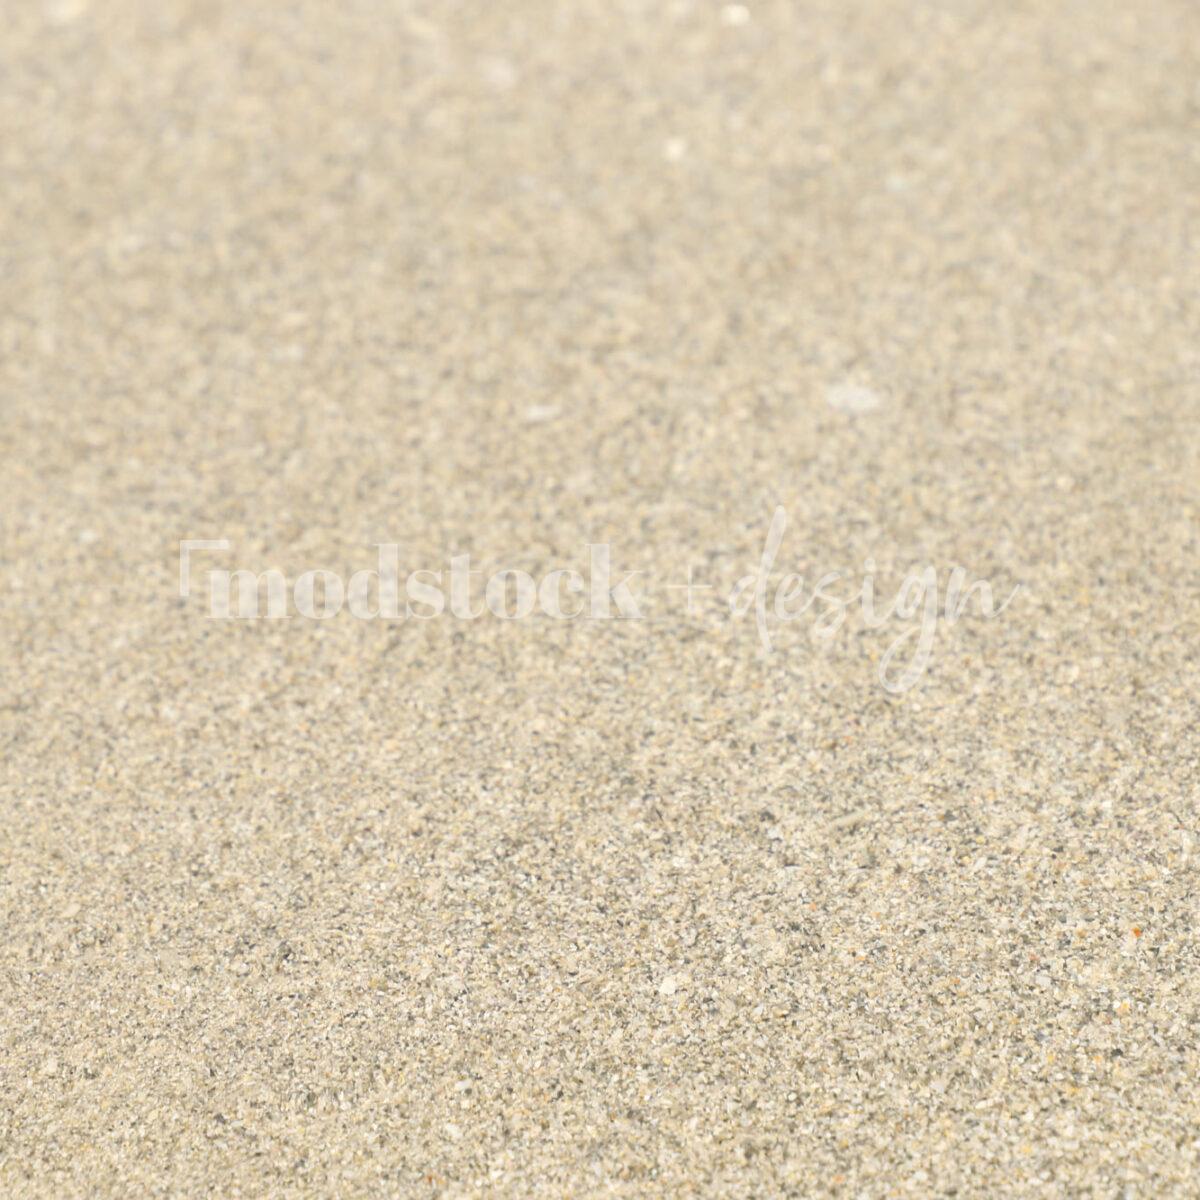 Water and Sand Textures 09